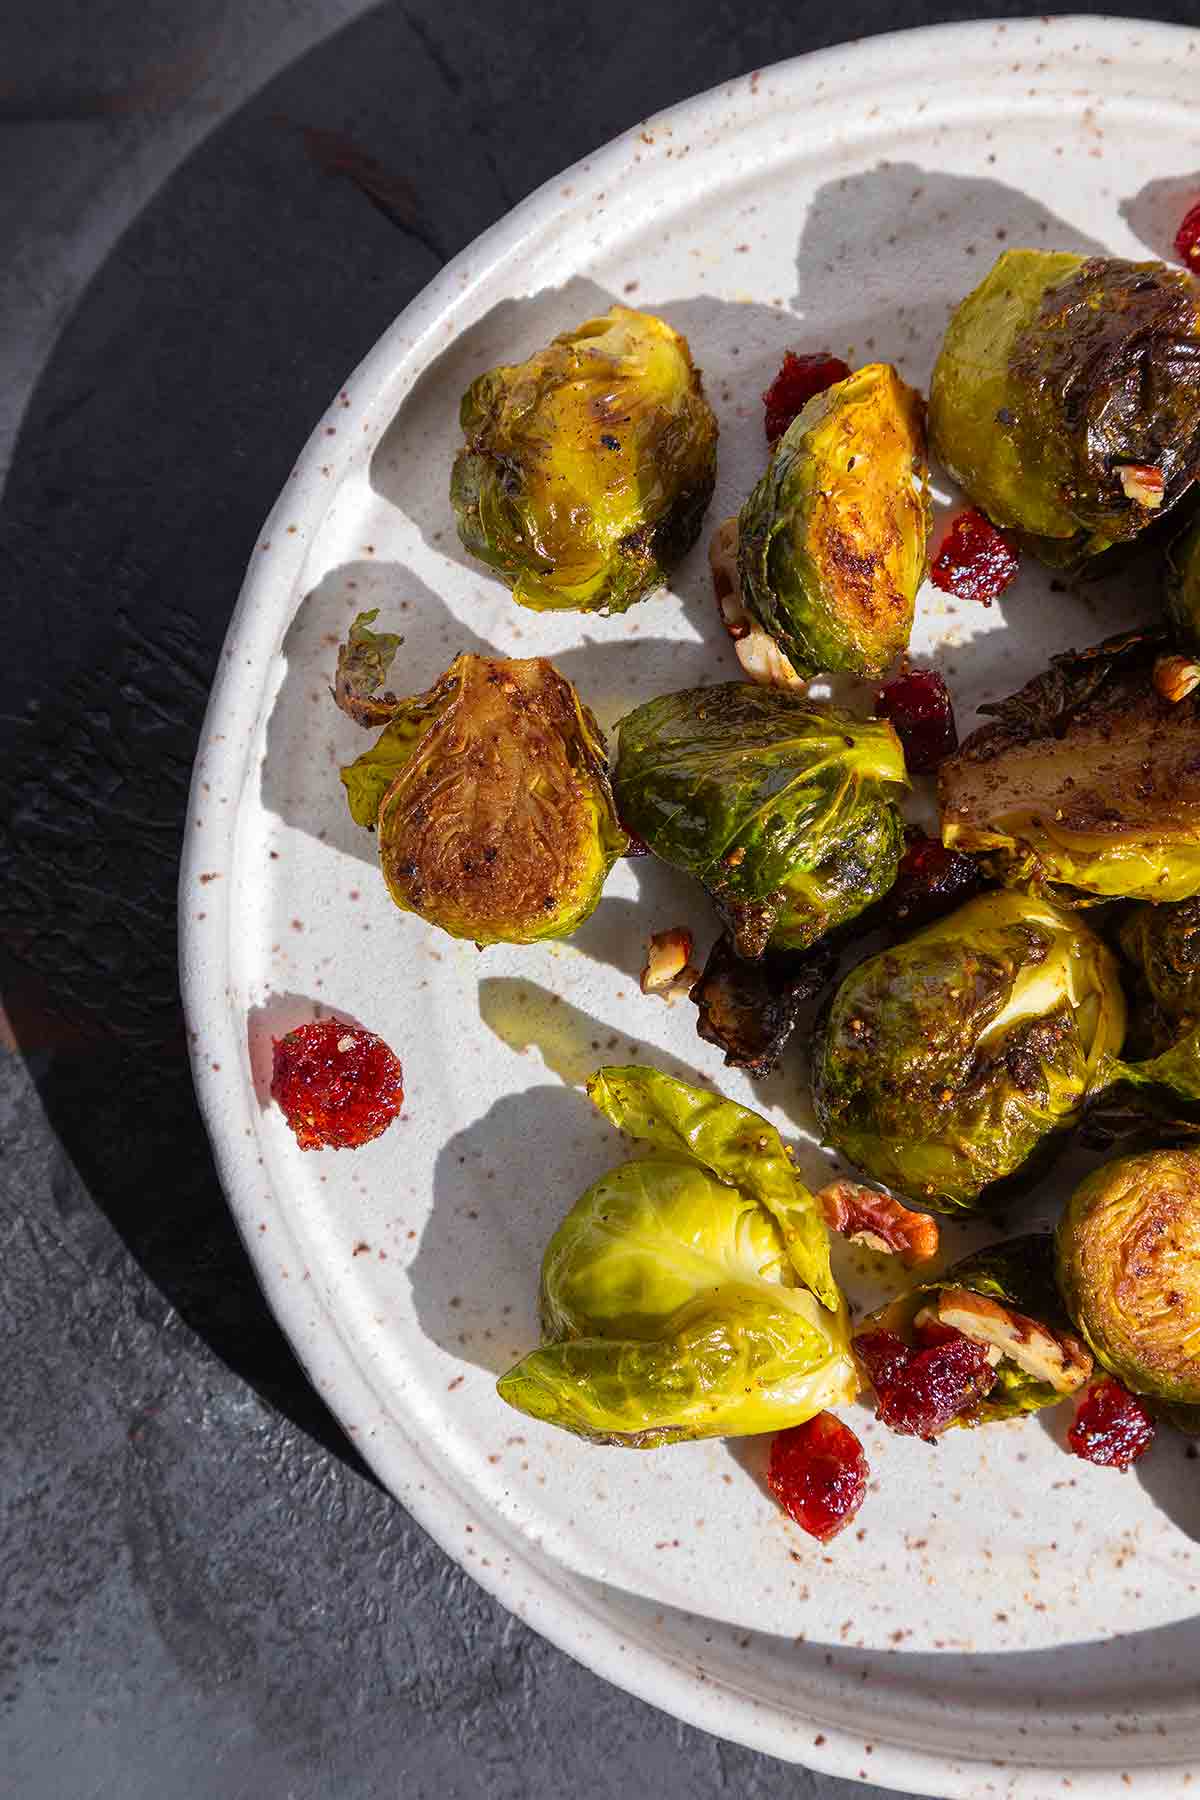 Roasted Brussels sprouts and cranberries on a plate.